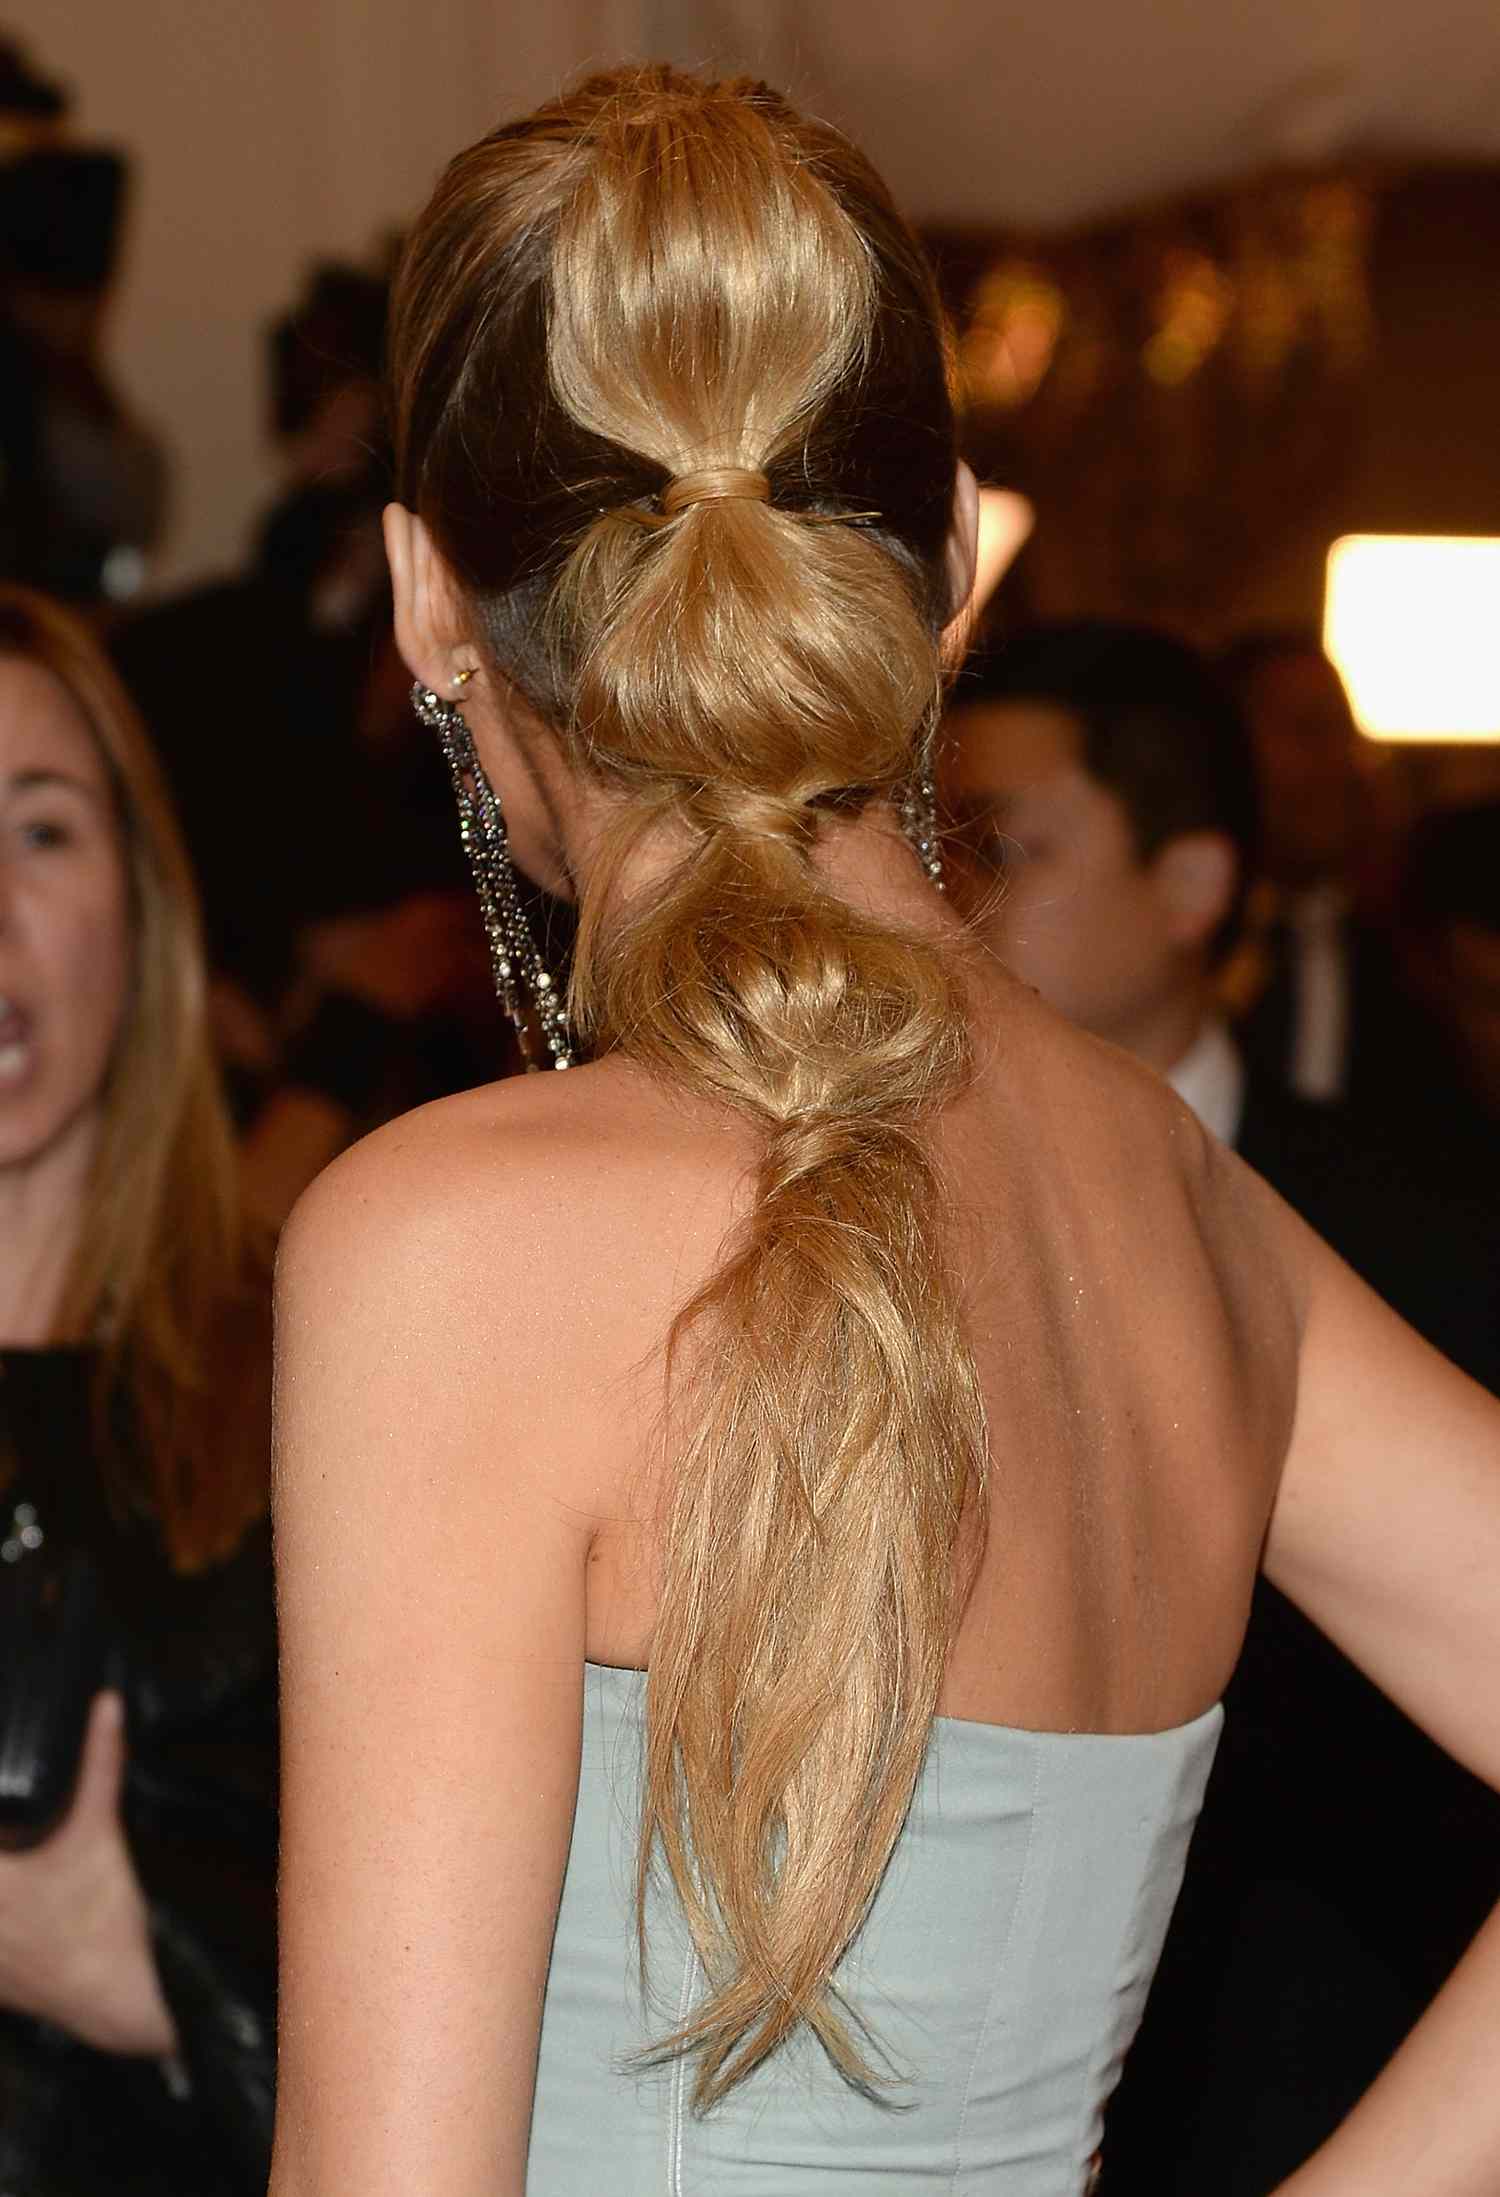 Blake Lively, viewed from behind, her hair in a blonde bubble ponytail